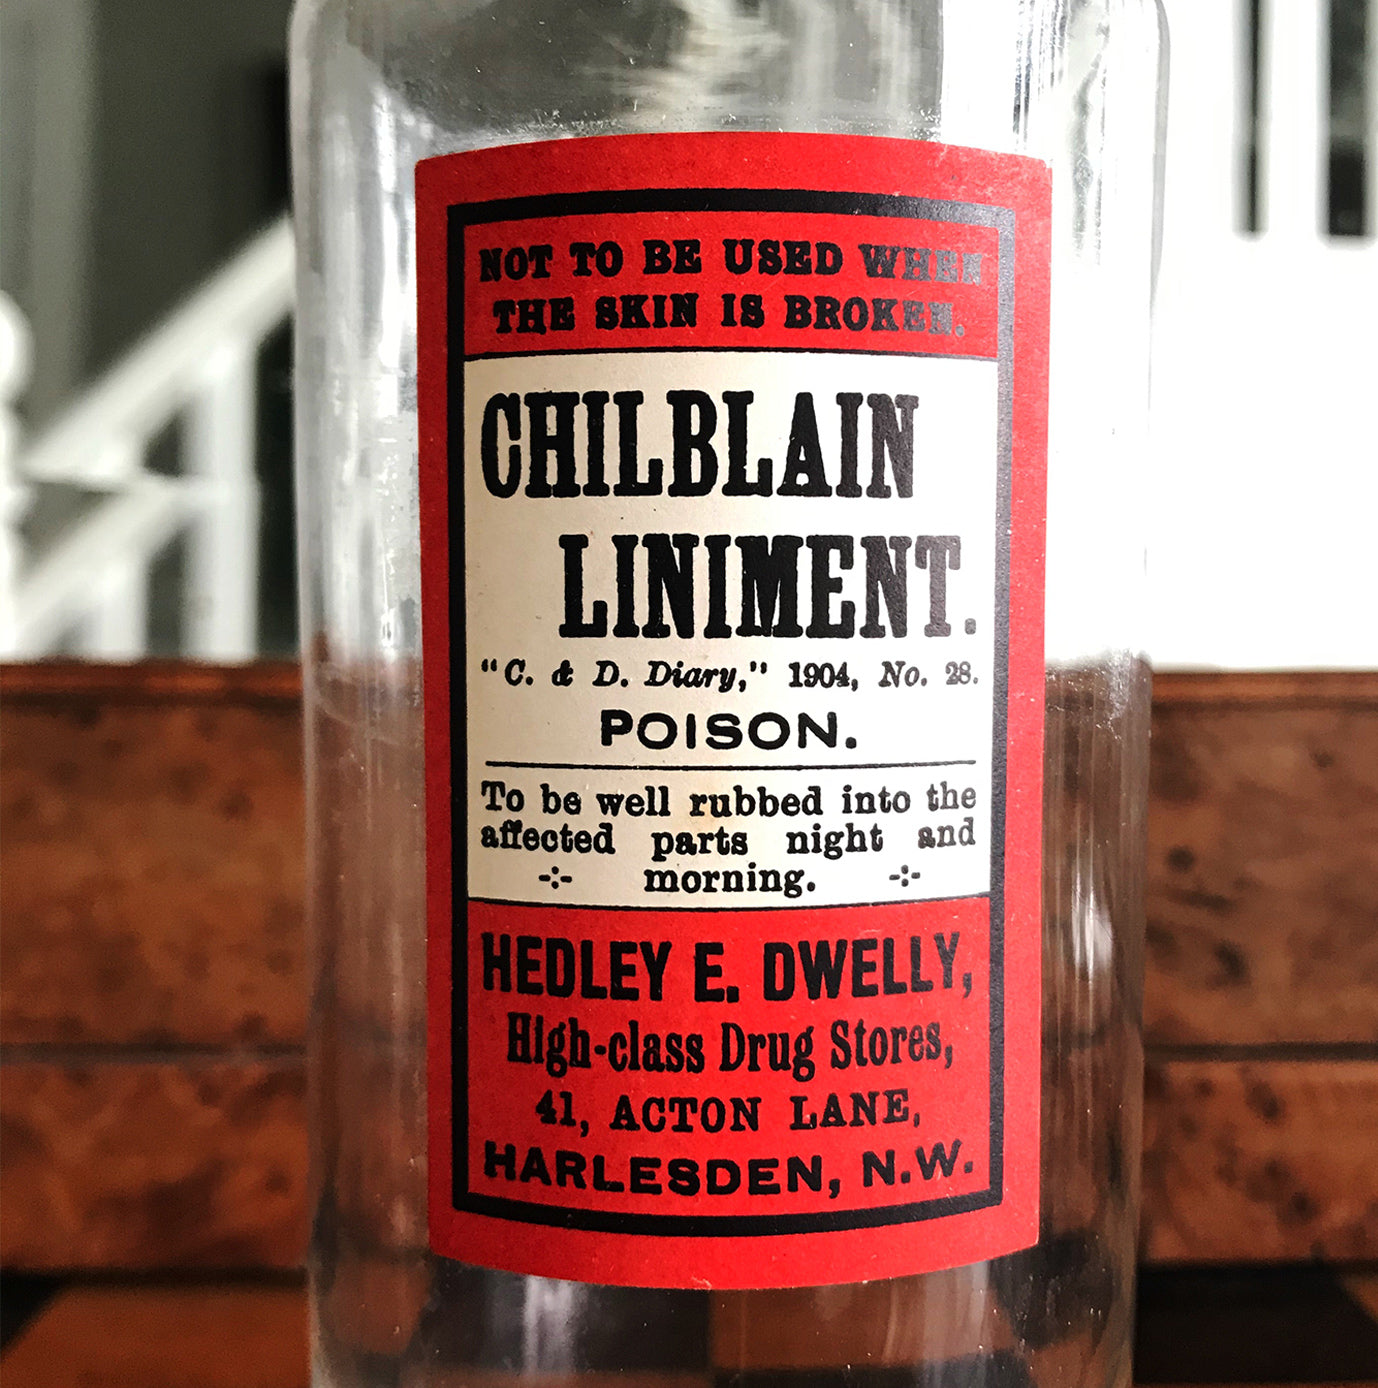 Vintage Apothecary Bottle with an original paper Poison label for Chilblain Liniment, Poison from Hedley E. Dwelly, High-Class Drug Stores, 41, Acton Lane, Harlesden. N.W. London - SHOP NOW - www.intovintage.co.uk